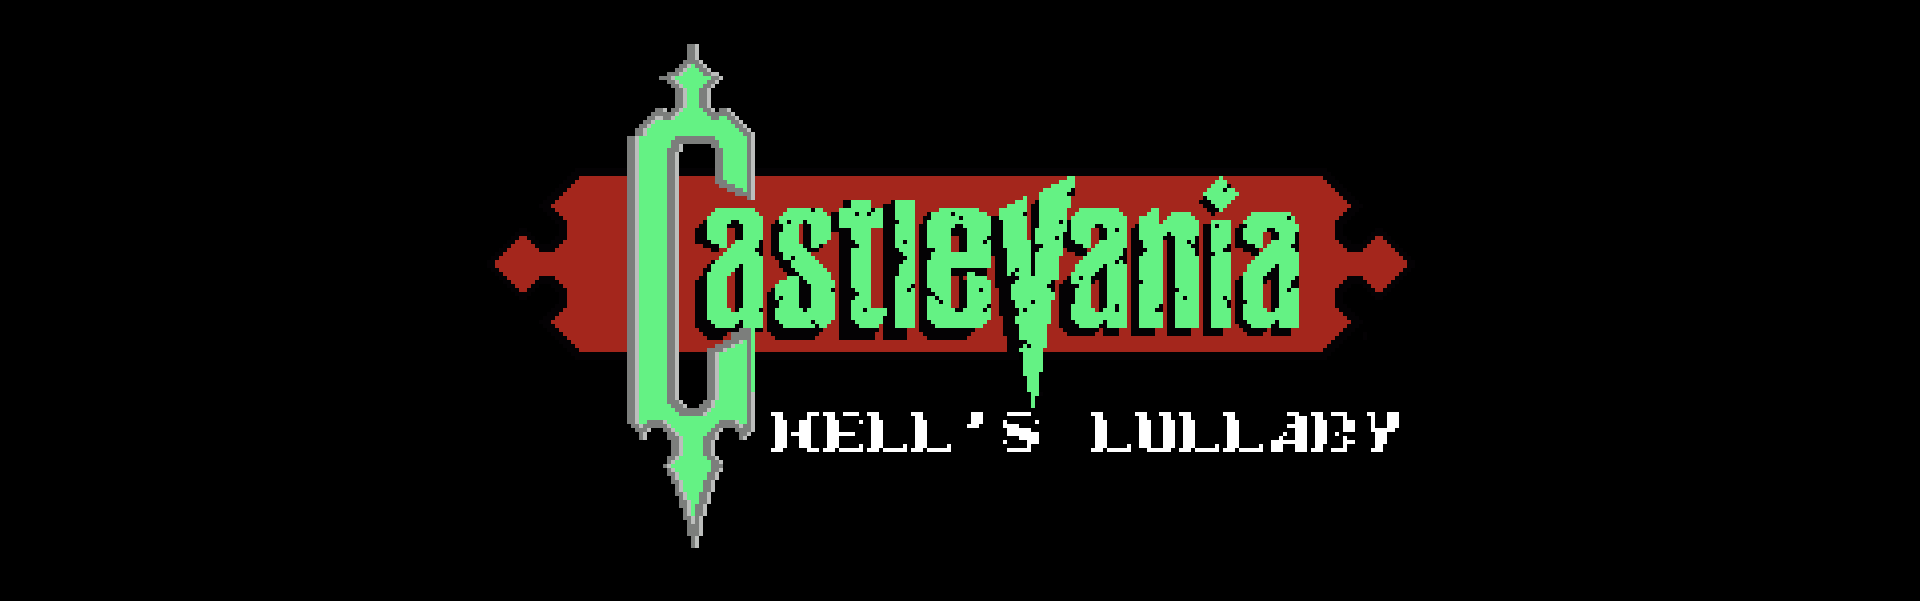 Castlevania Hell's Lullaby